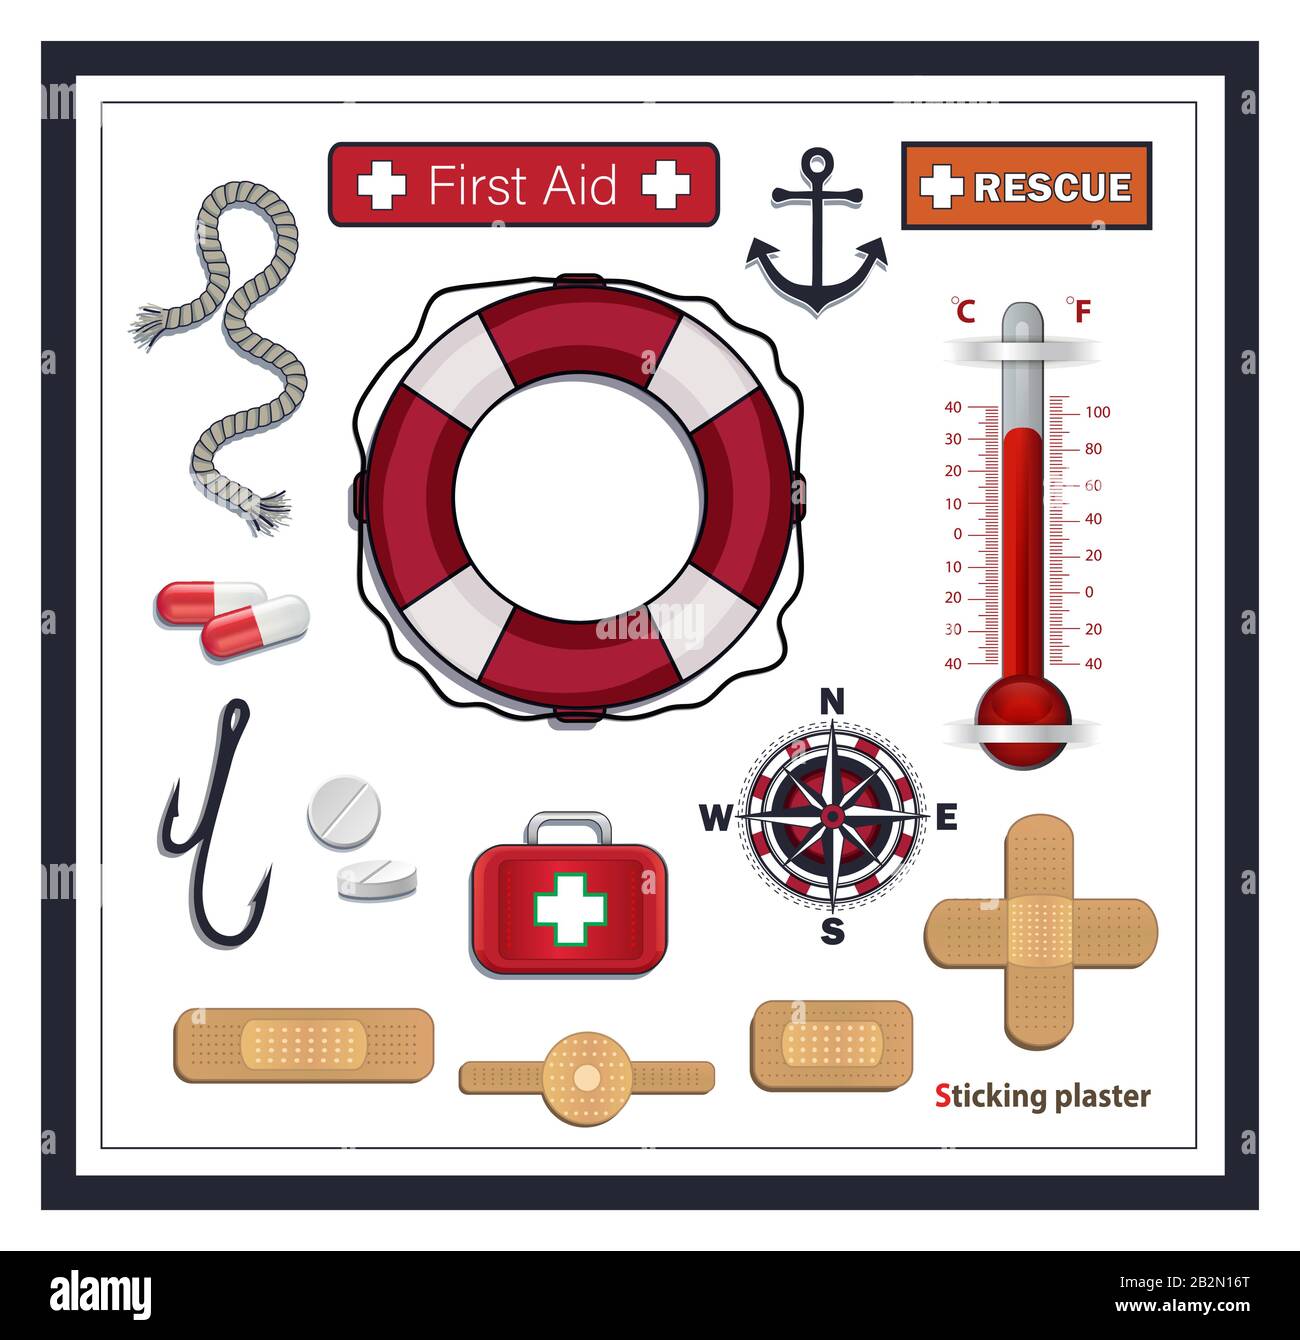 Nautical collection icons, first aid and rescue, lifebuoy, sticking plaster, compass and medicines, Isolated on white background vector Stock Vector